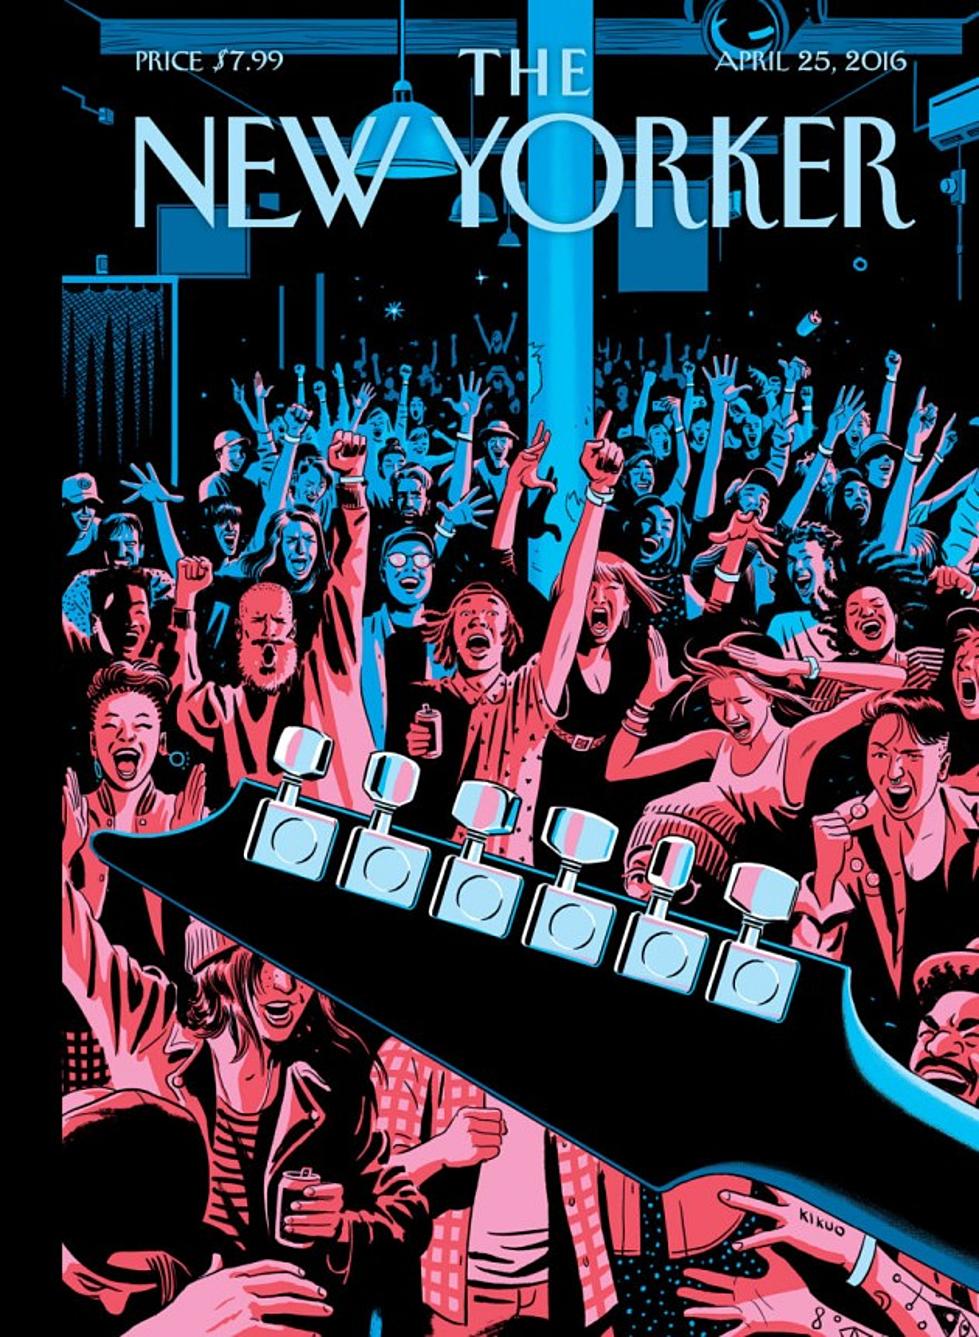 Palisades is featured on the cover of The New Yorker&#8217;s &#8220;Entertainment Issue&#8221;